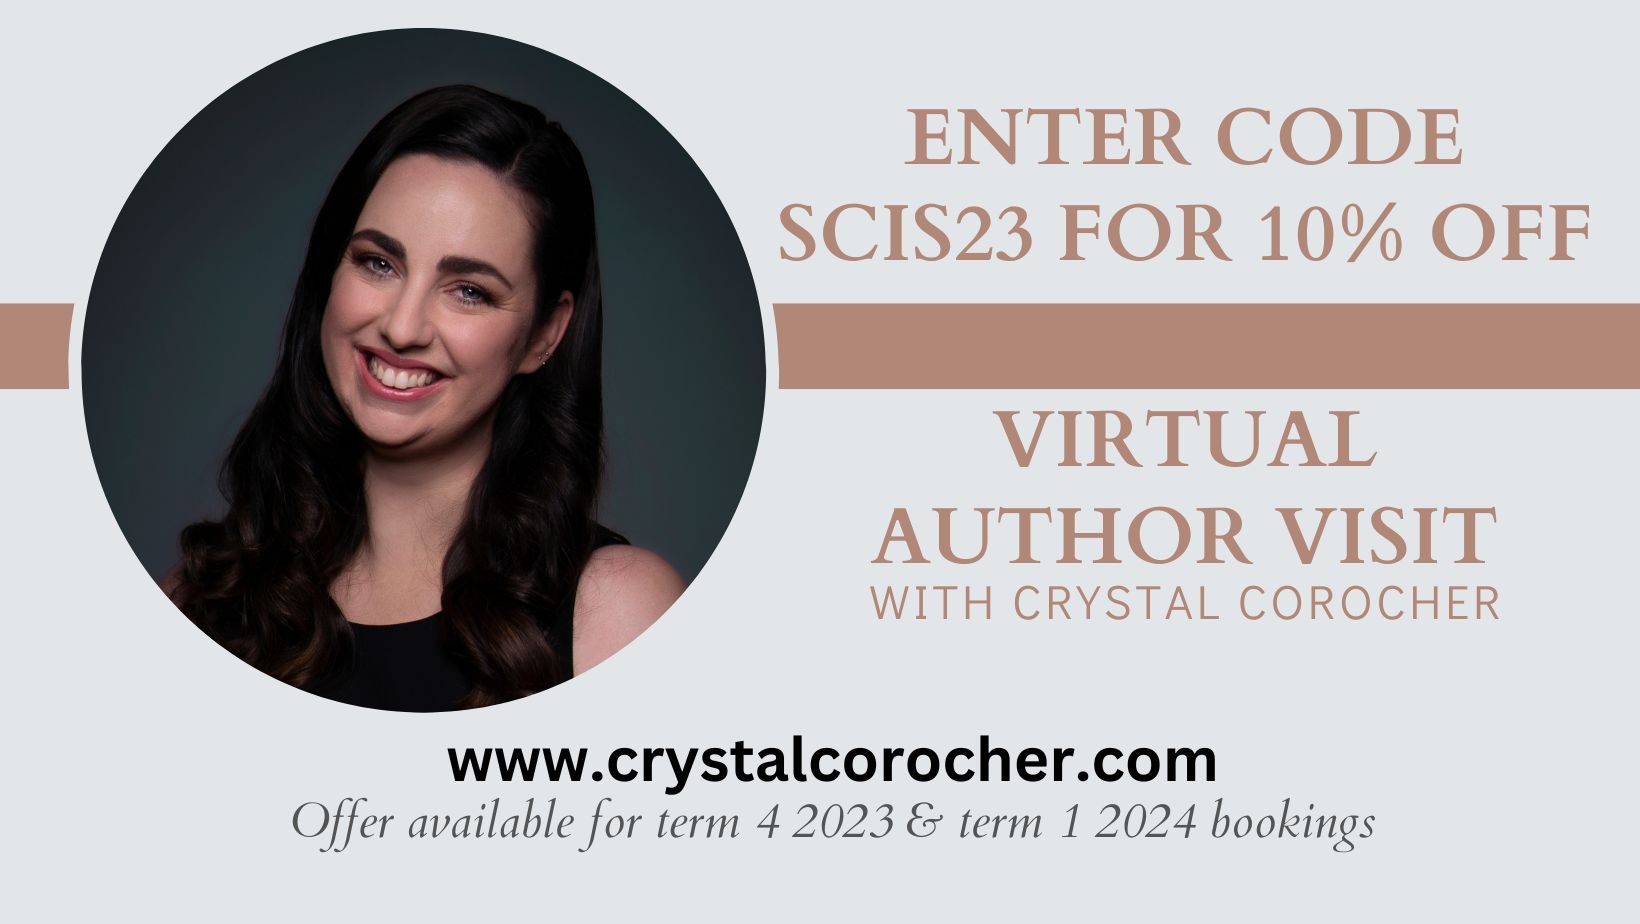 Special offer to: ENTER SCIS23 for 10% off Crystal's book